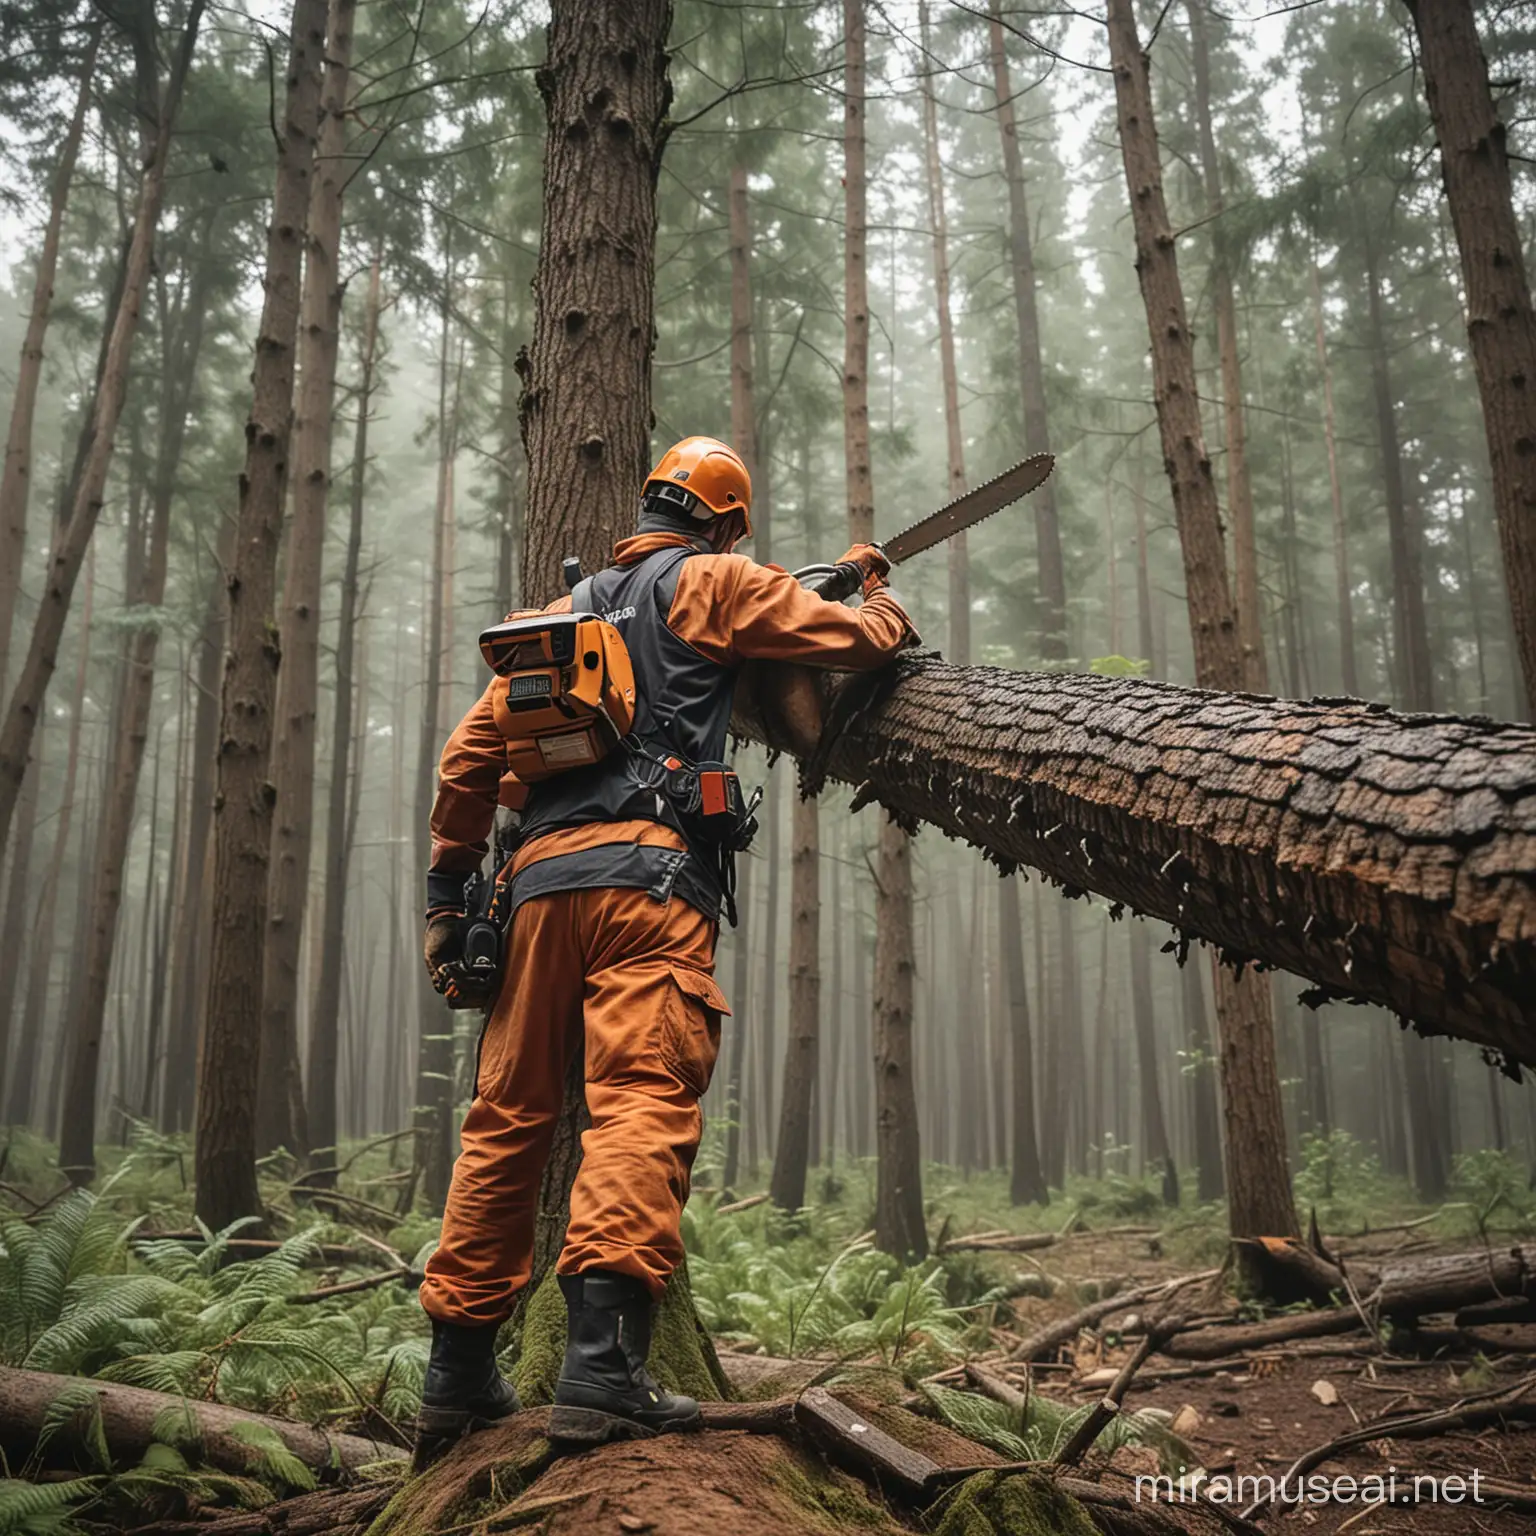 Forestry Worker Operating Chainsaw to Fell Large Tree